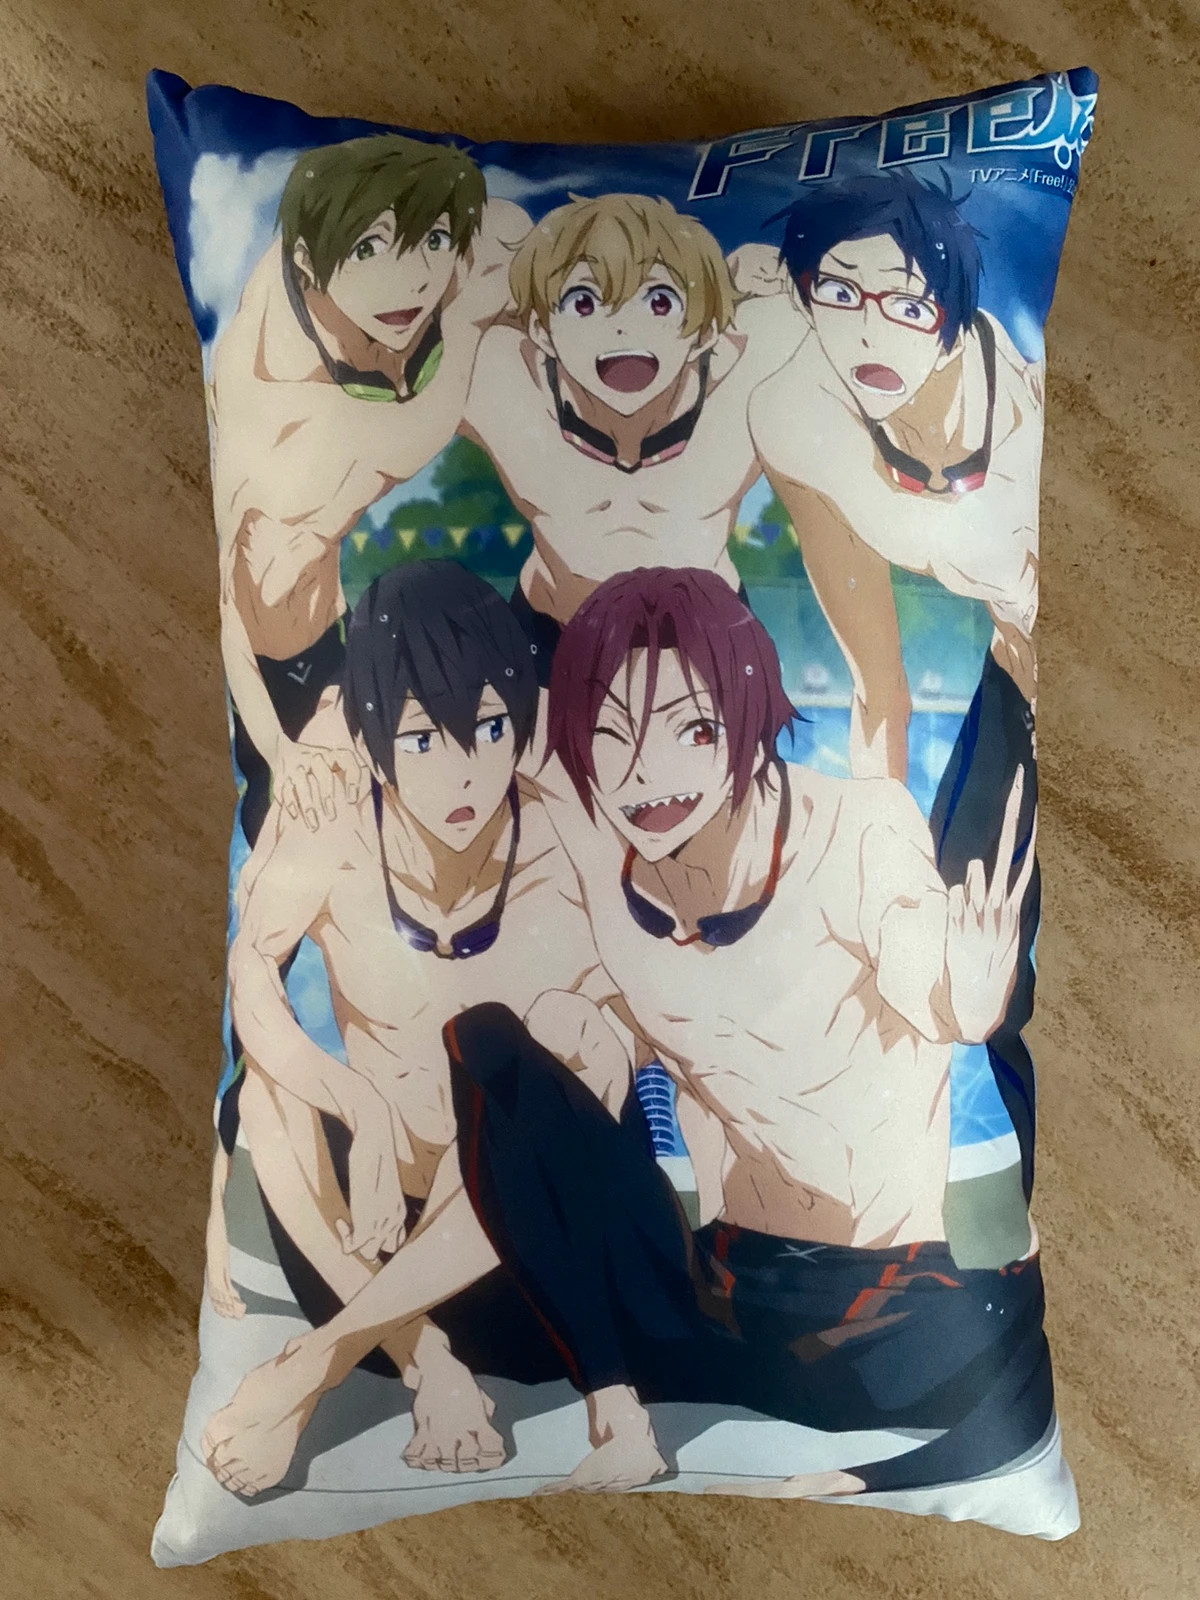 Pillow from the anime Free!